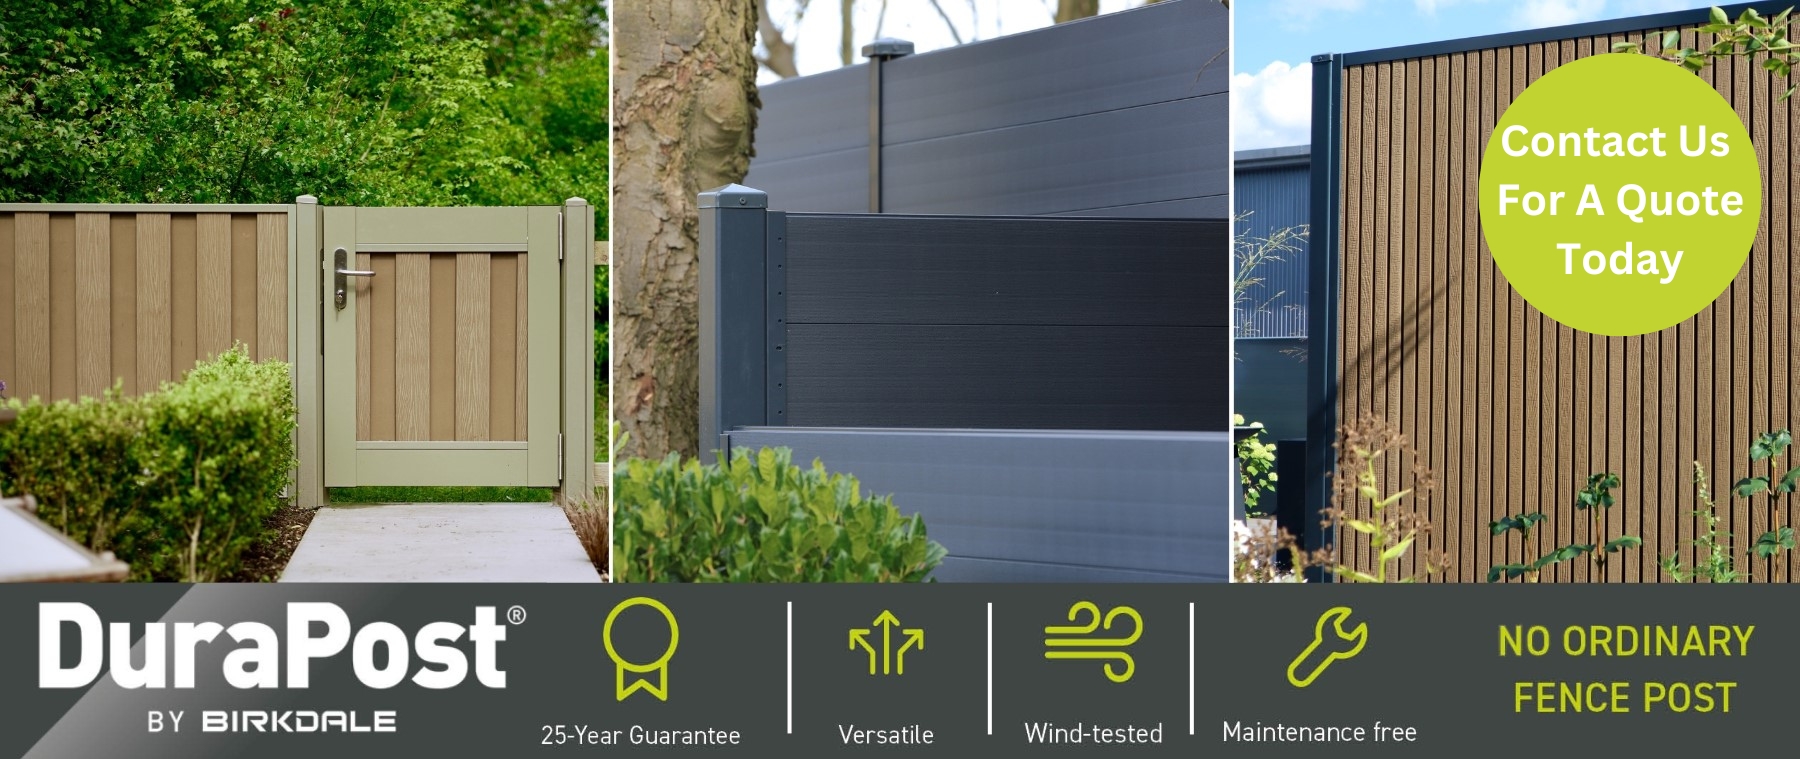 DuraPost composite fencing showing the Vento and Urban ranges